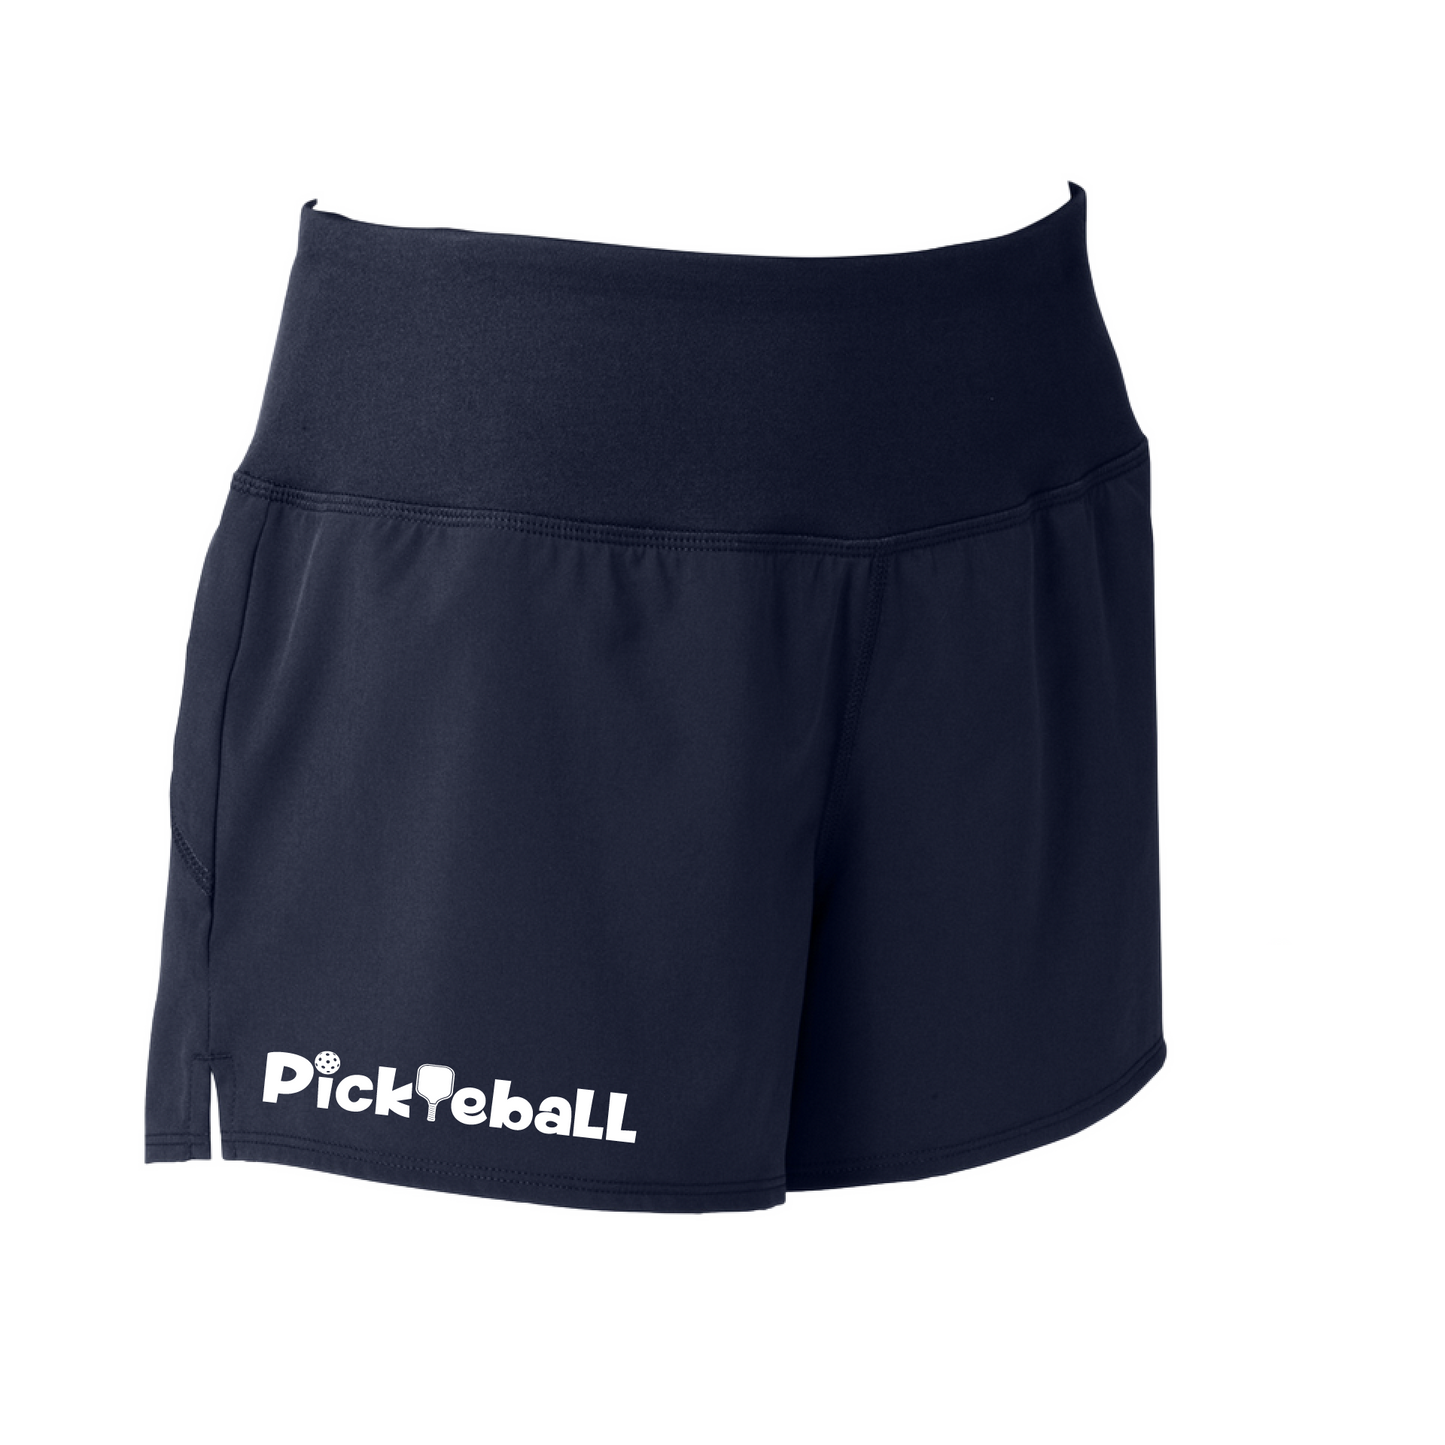 Pickleball Designs: Pickleball  Sport Tek women’s repeat shorts come with built-in cell phone pocket on the exterior of the waistband. You can also feel secure knowing that no matter how strenuous the exercise, the shorts will remain in place (it won’t ride up!). These shorts are extremely versatile and trendy. Transition from the Pickleball court to running errands smoothly